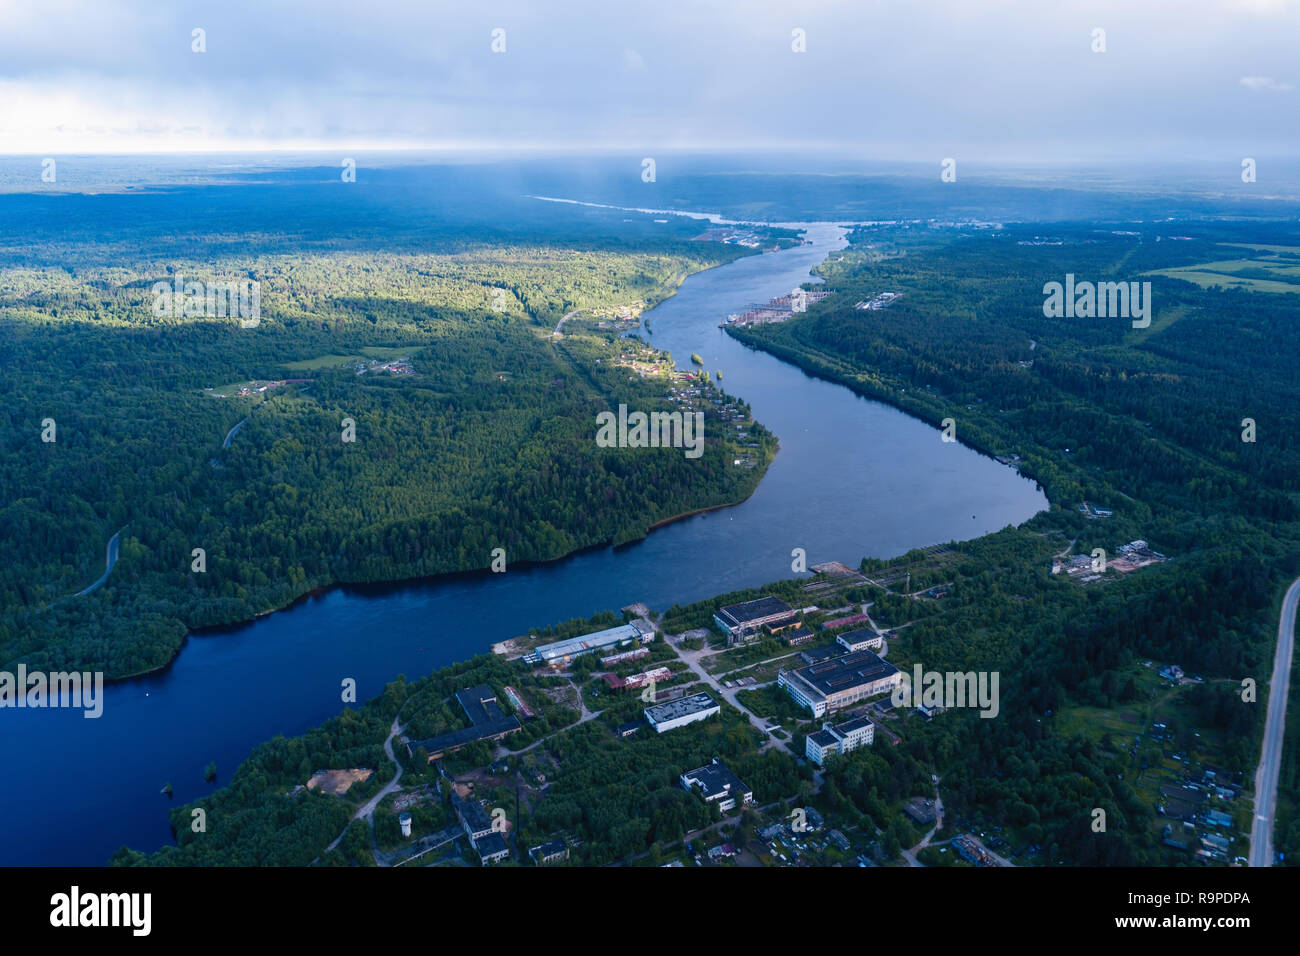 Bird's eye view of Svir river and green forests of Leningrad region, Russia. Stock Photo